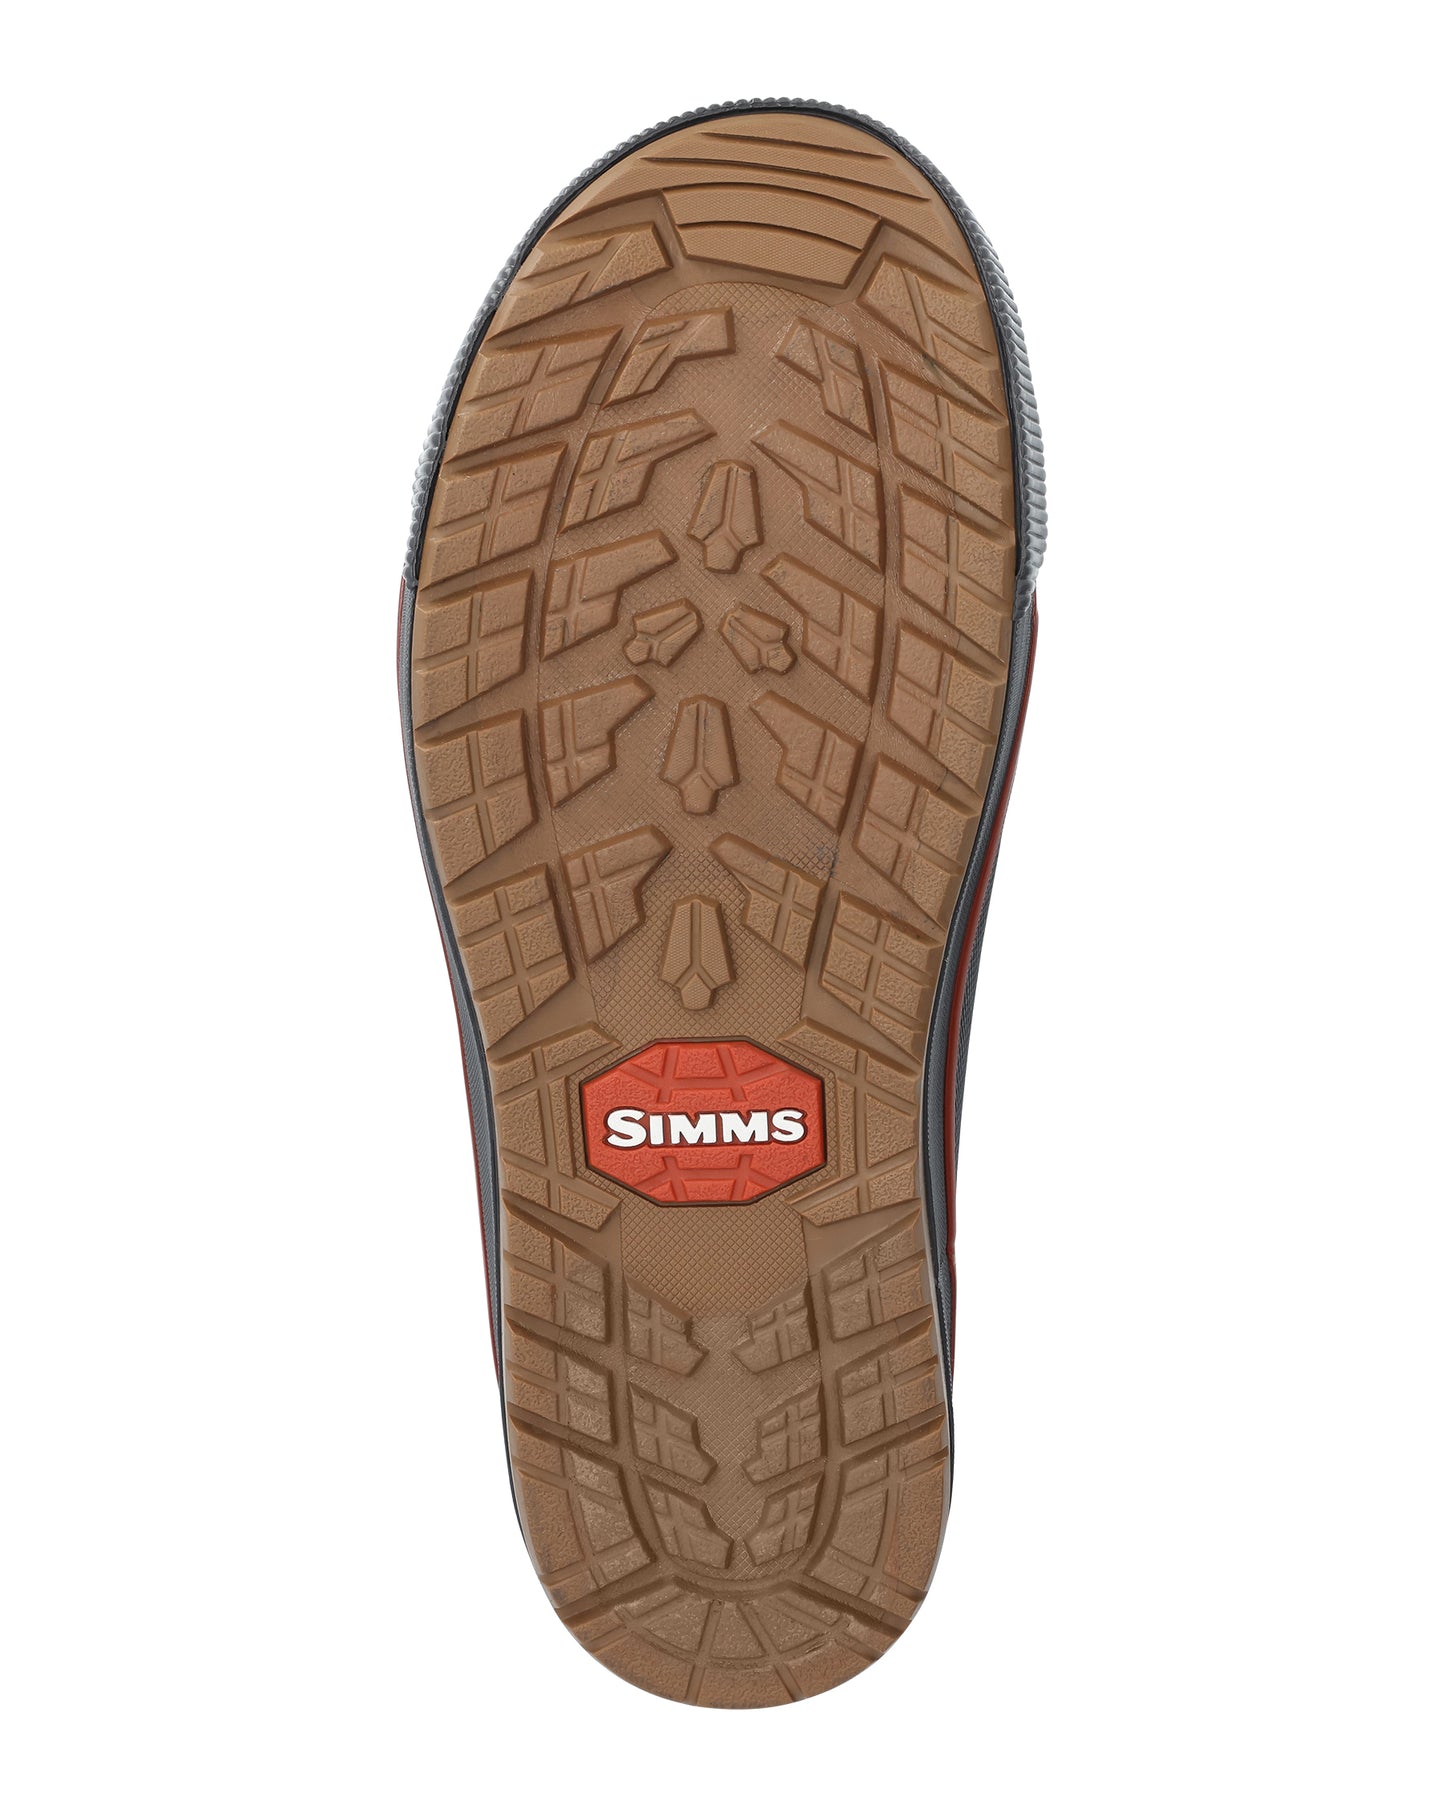    13939-096-Simms-Challenger-7inch-Boot-Tabletop